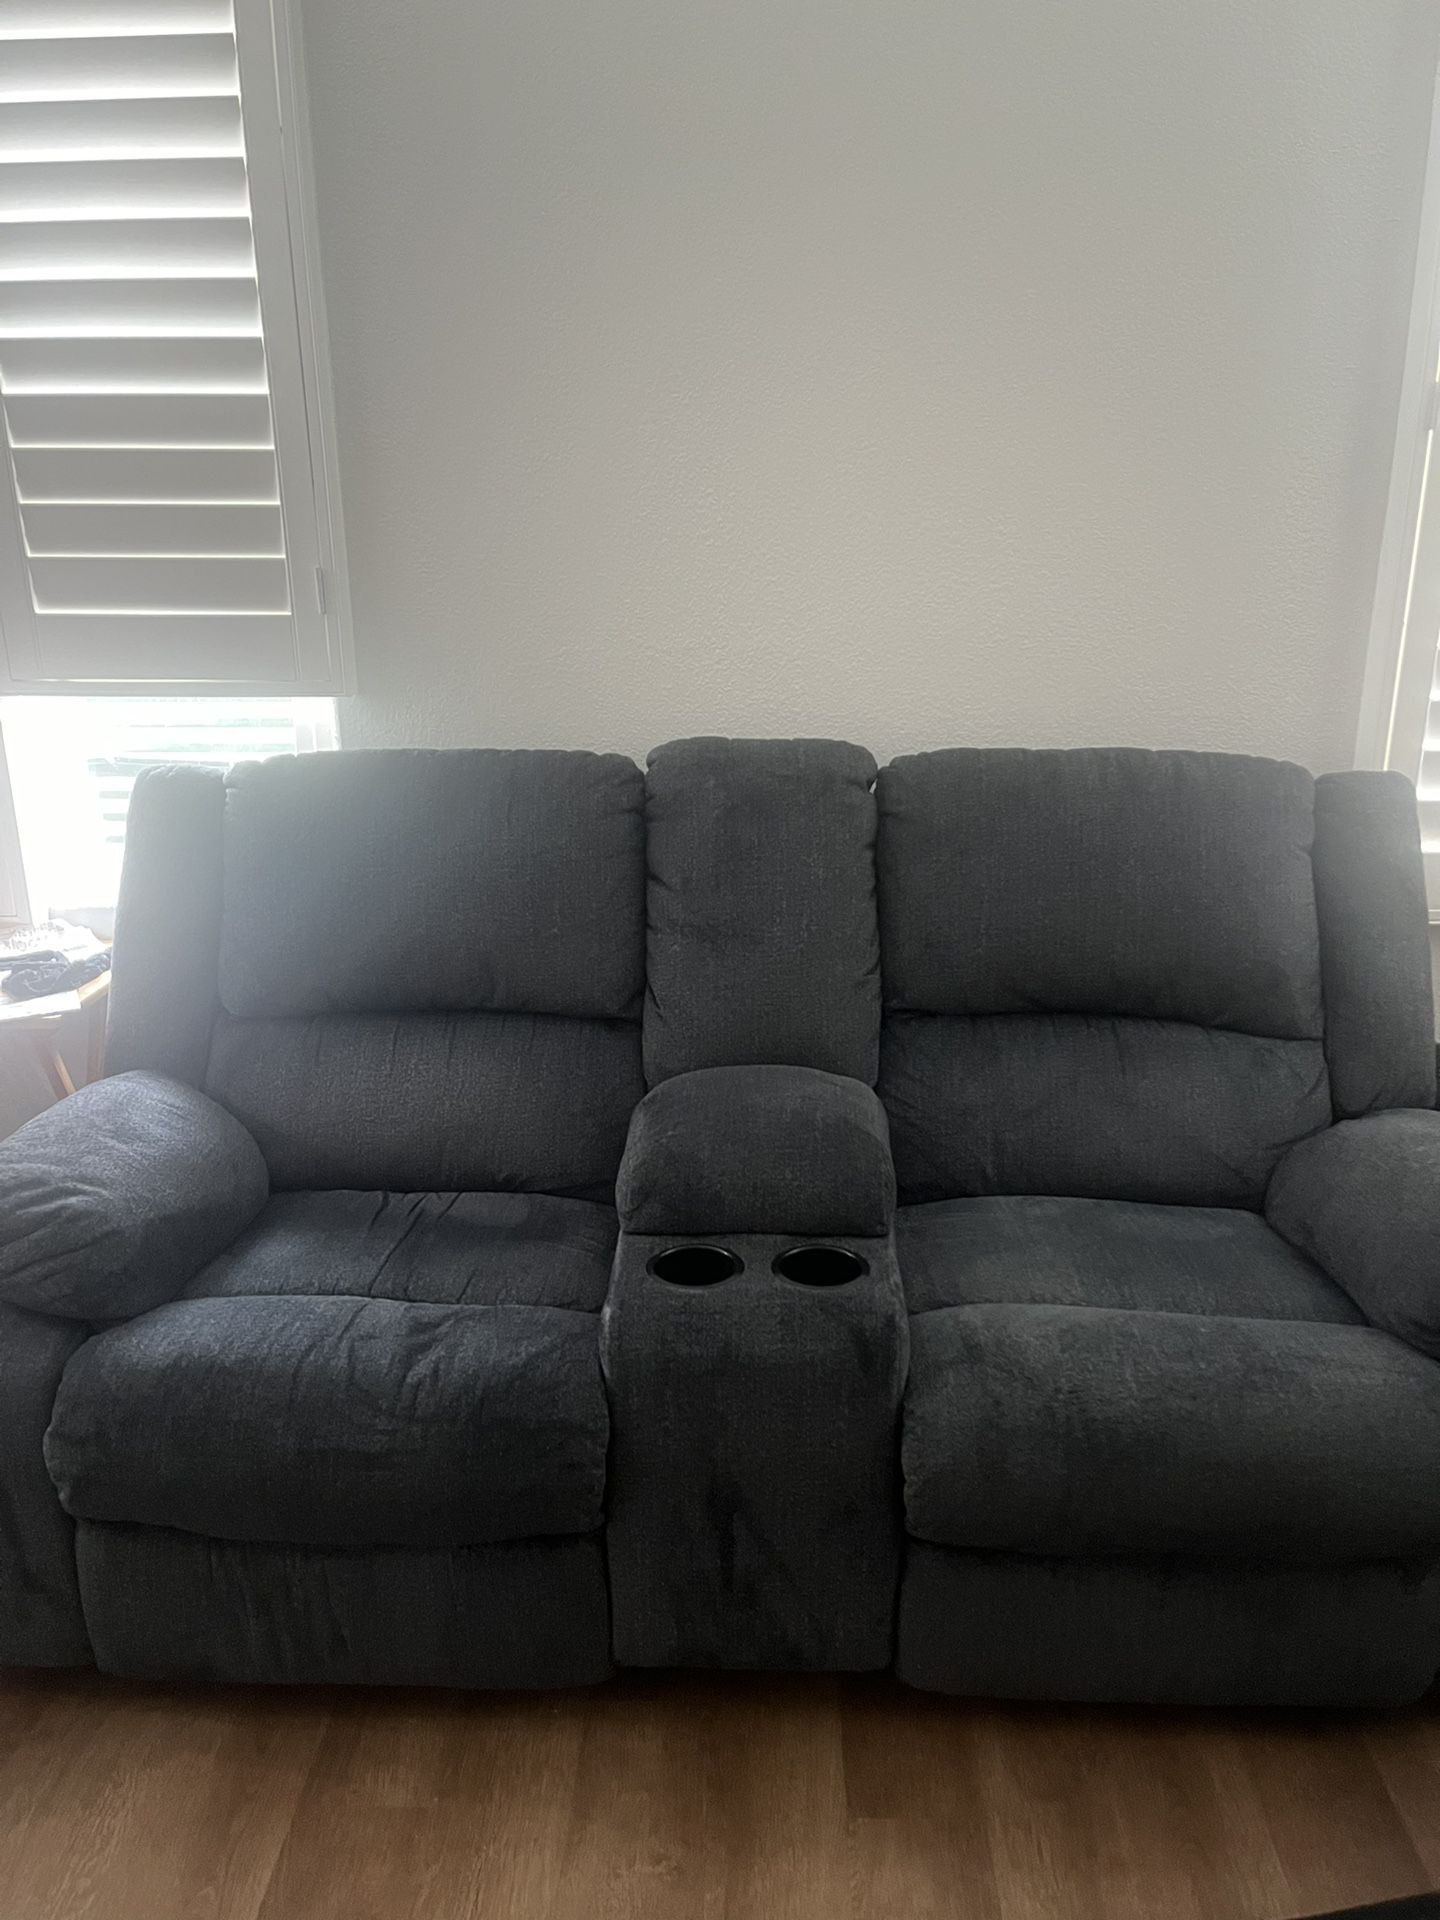 Two Love Seat Recliners For Sale 